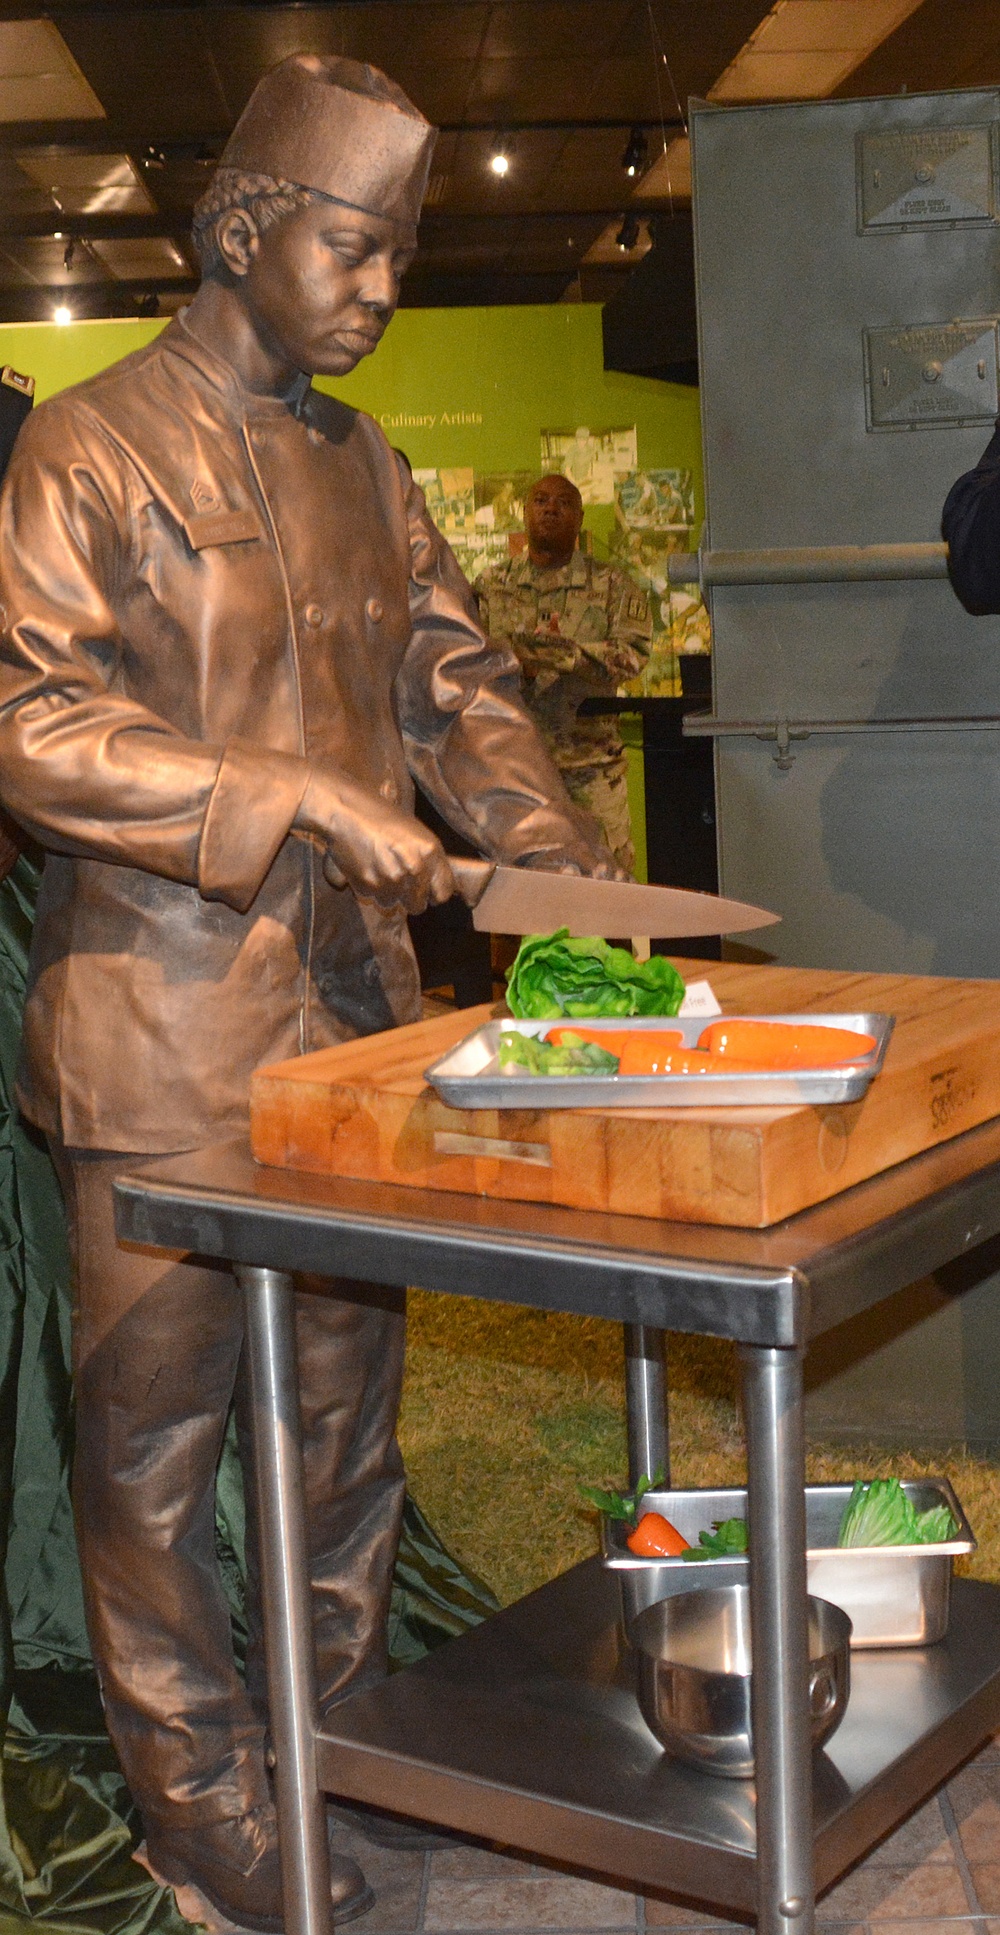 Culinary specialist statue unveiled in QM Museum Subsistence Gallery